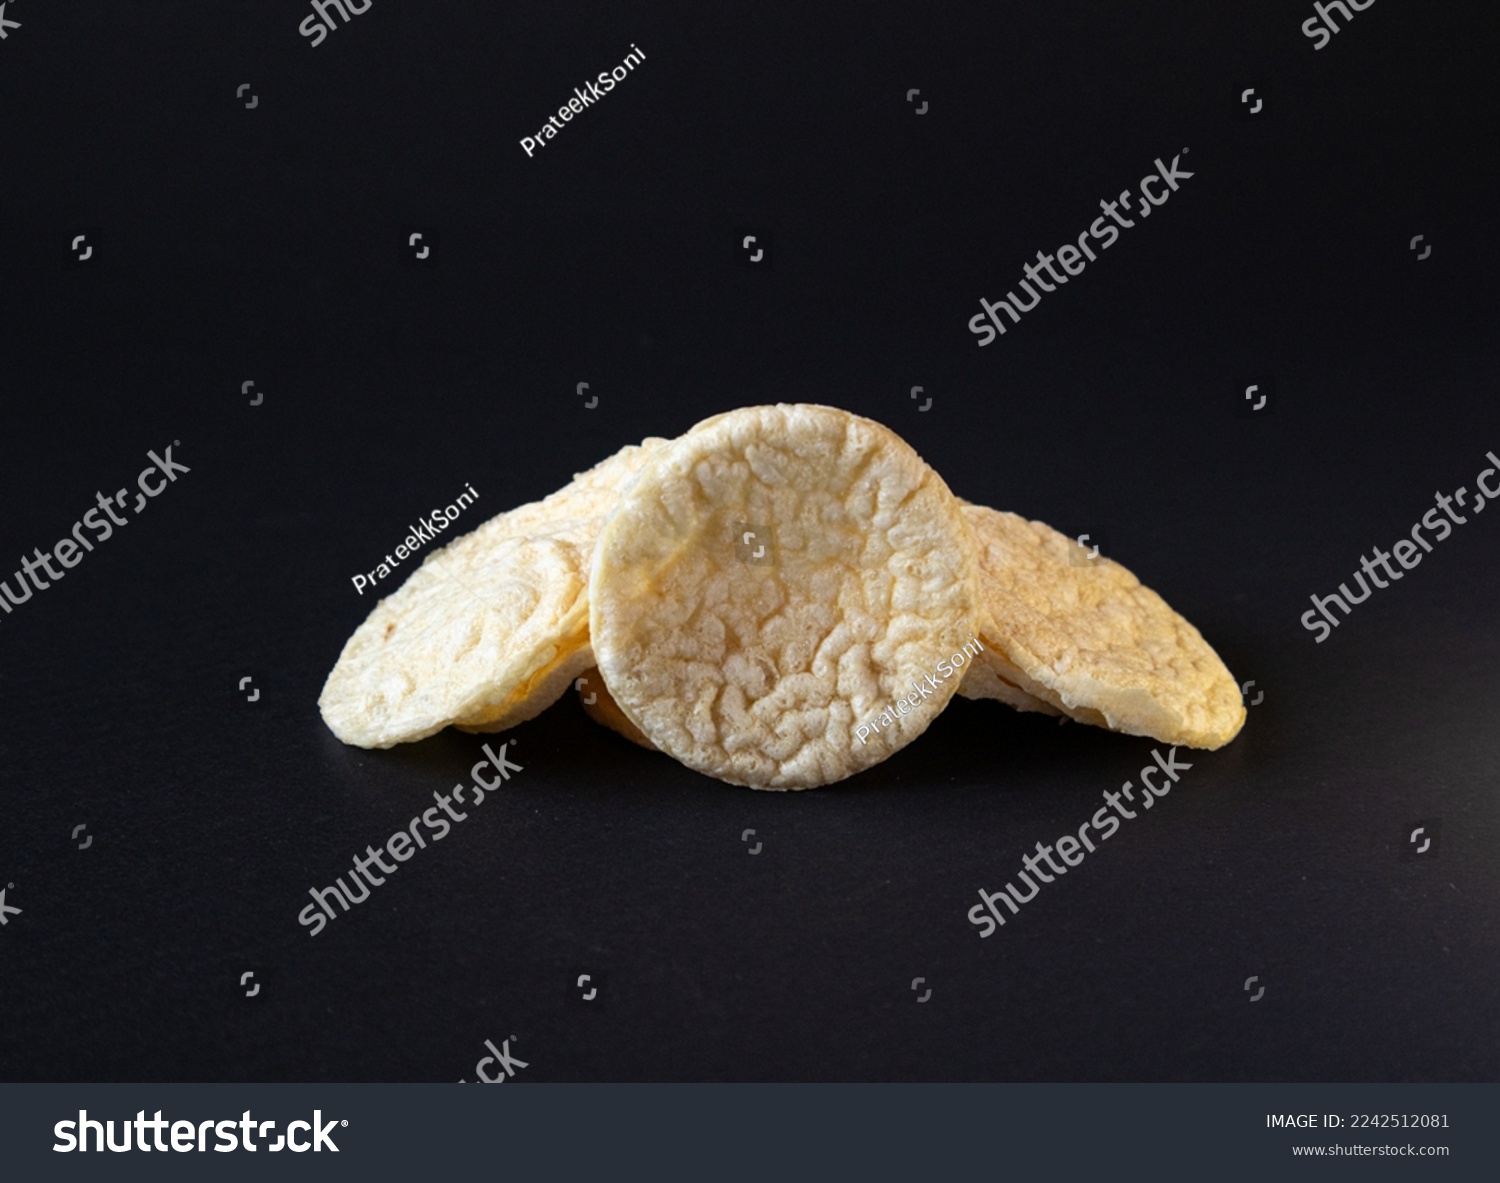 Puffed Potato Chips, Stacked on a plain black background with shadow, healthy potato snack.Puffed chis  #2242512081